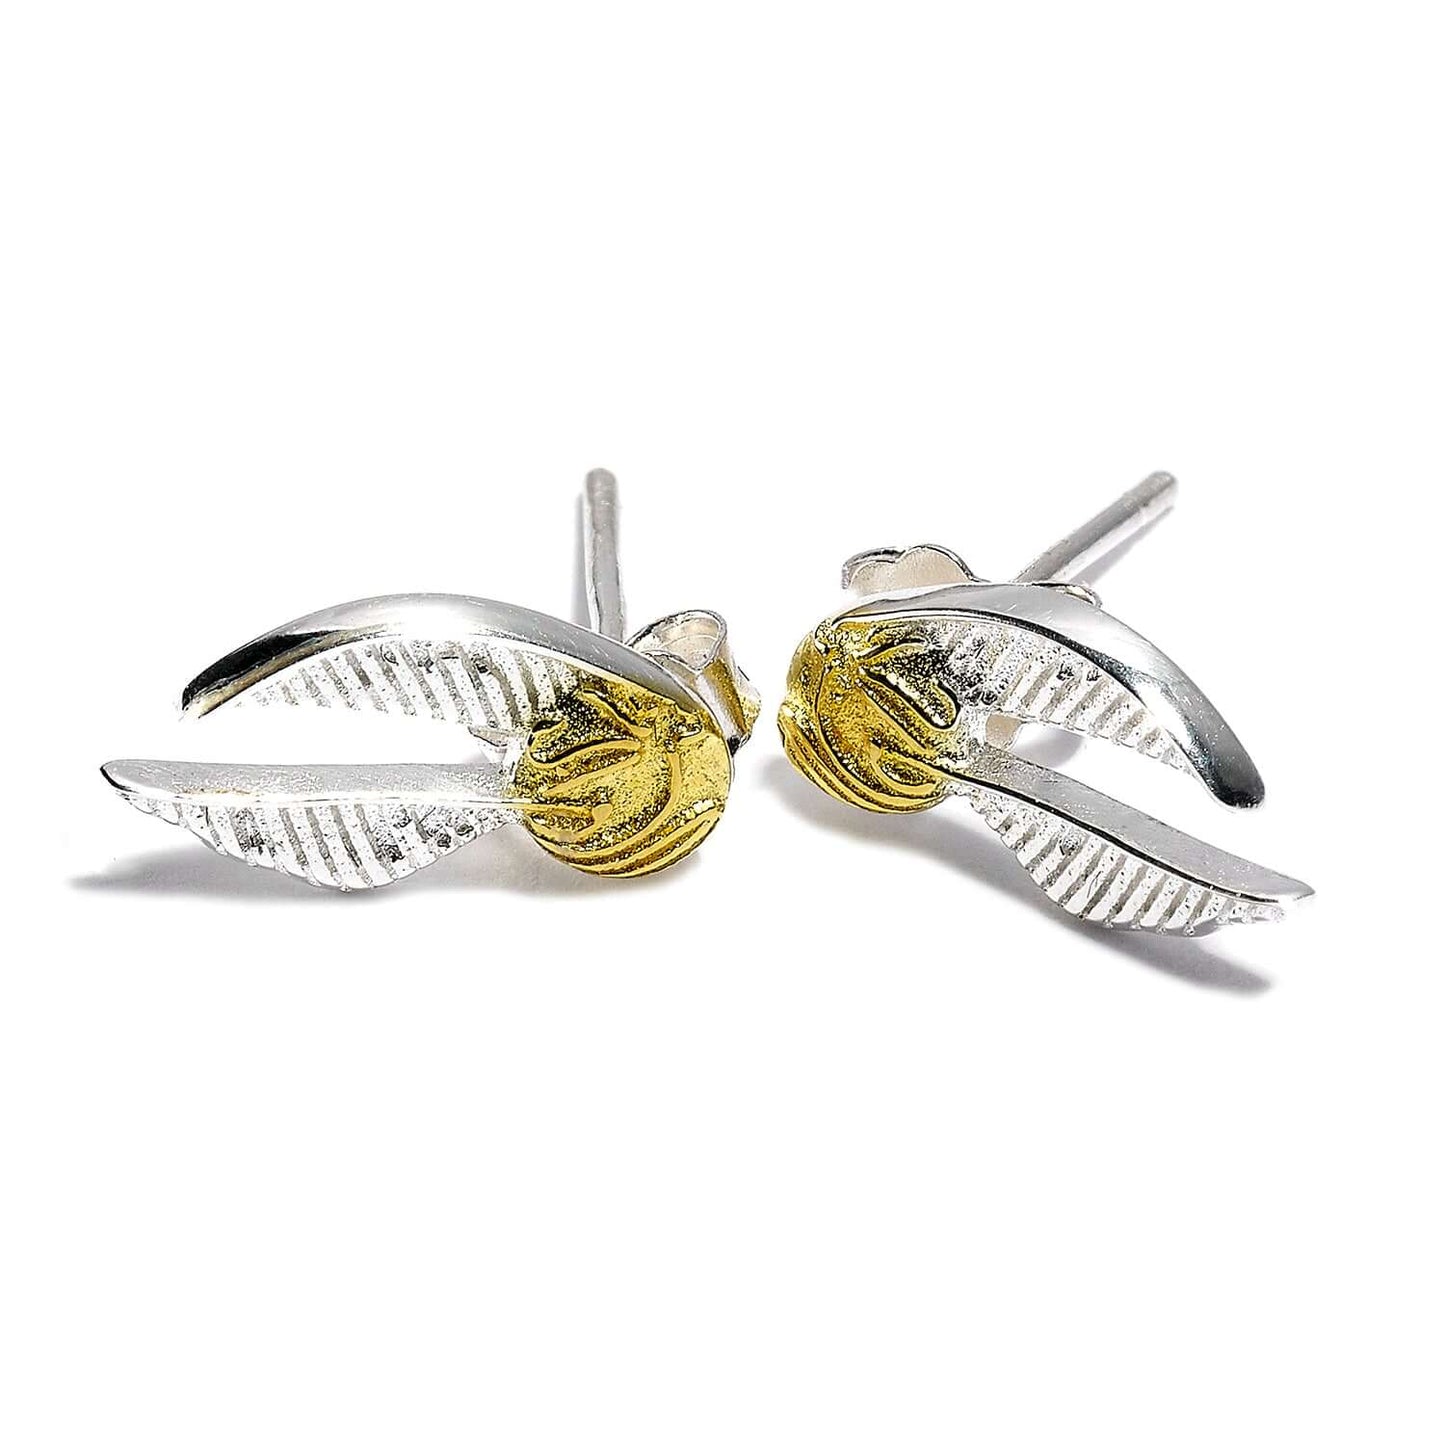 Earrings / Studs - Harry Potter Official - Golden Snitch